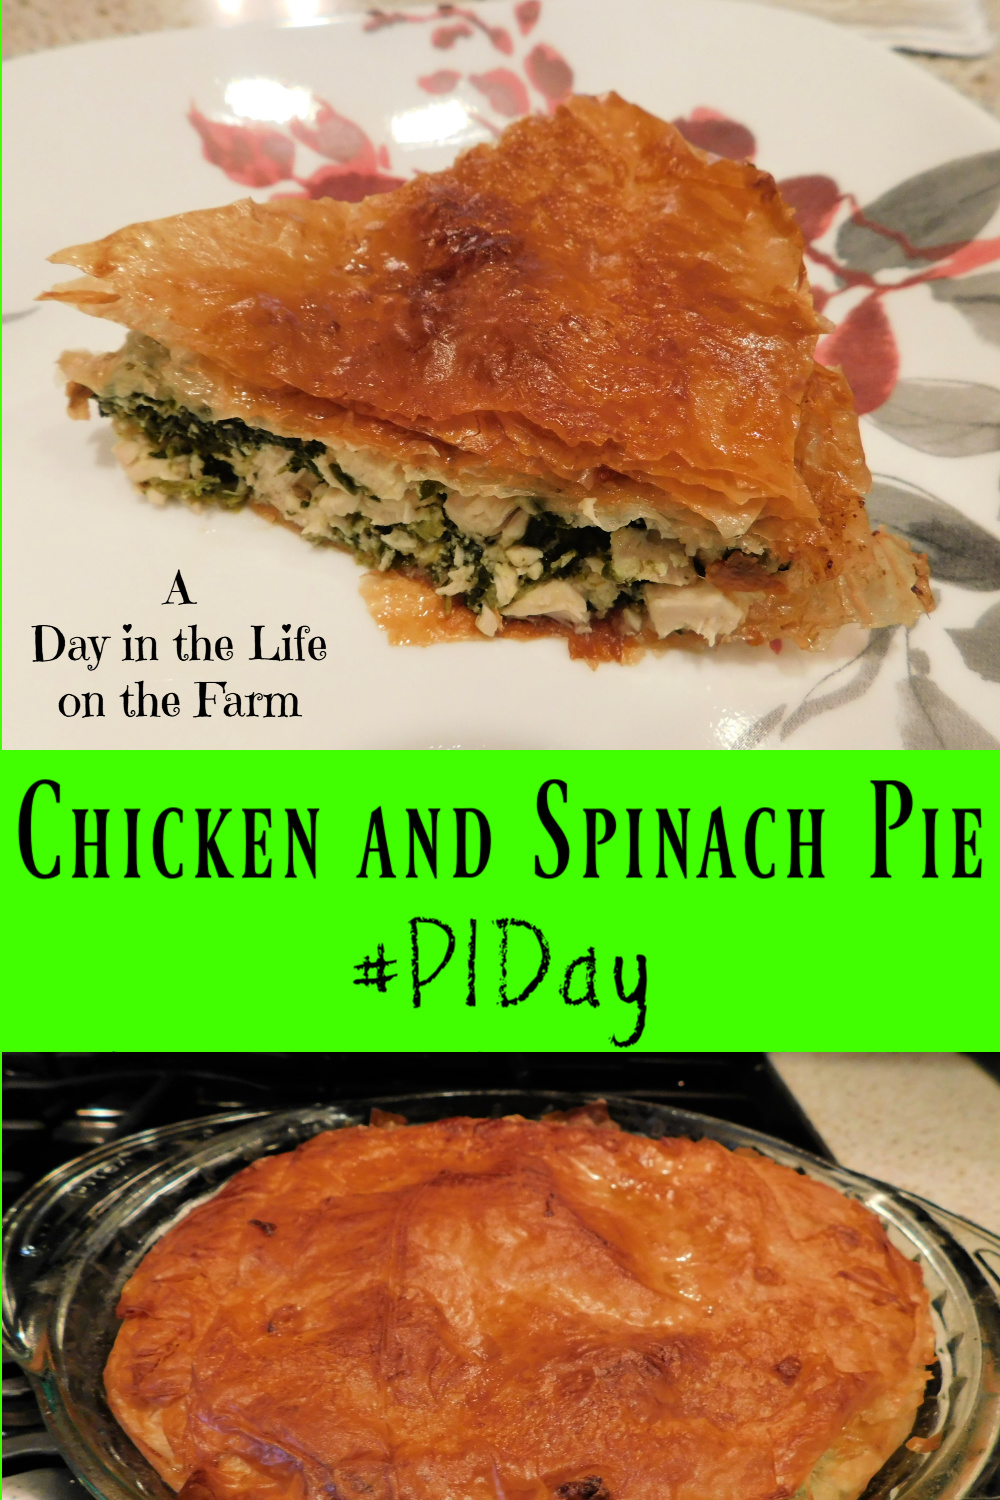 A Day in the Life on the Farm: Greek Spinach and Chicken Pie #Pi Day